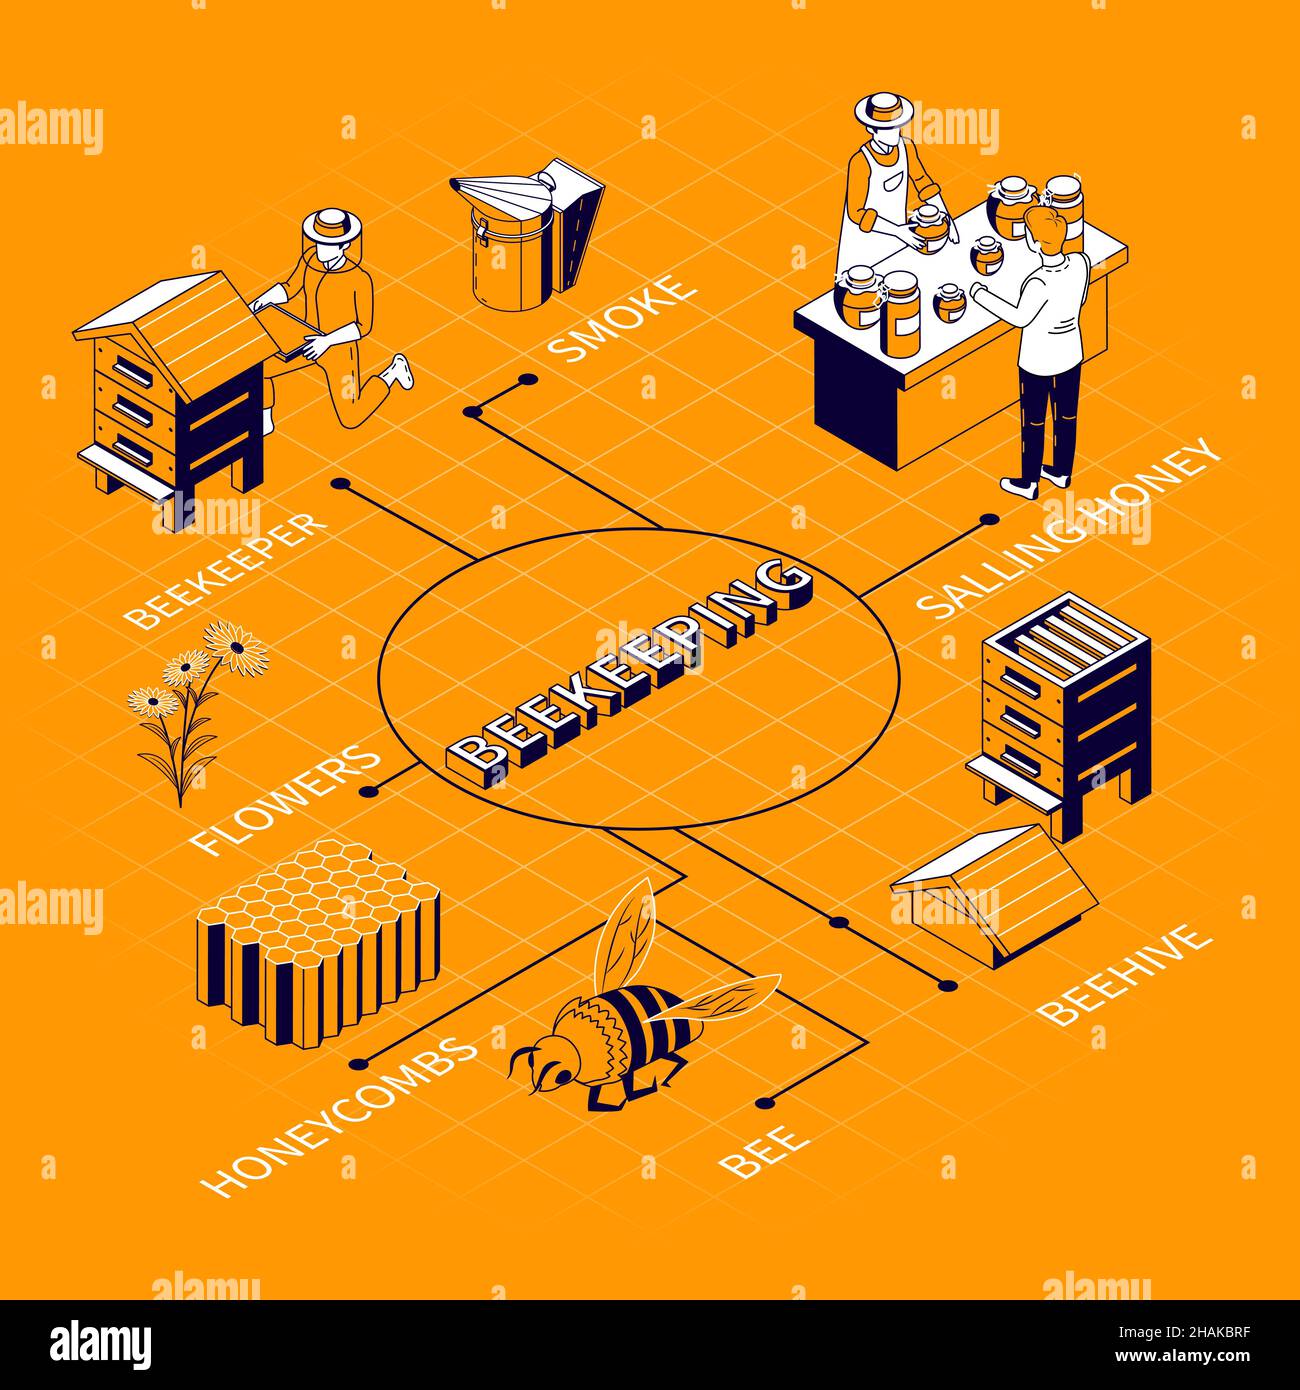 Beekeeping isometric flowchart composition with editable text captions and images of hives honeycombs flowers and people vector illustration Stock Vector